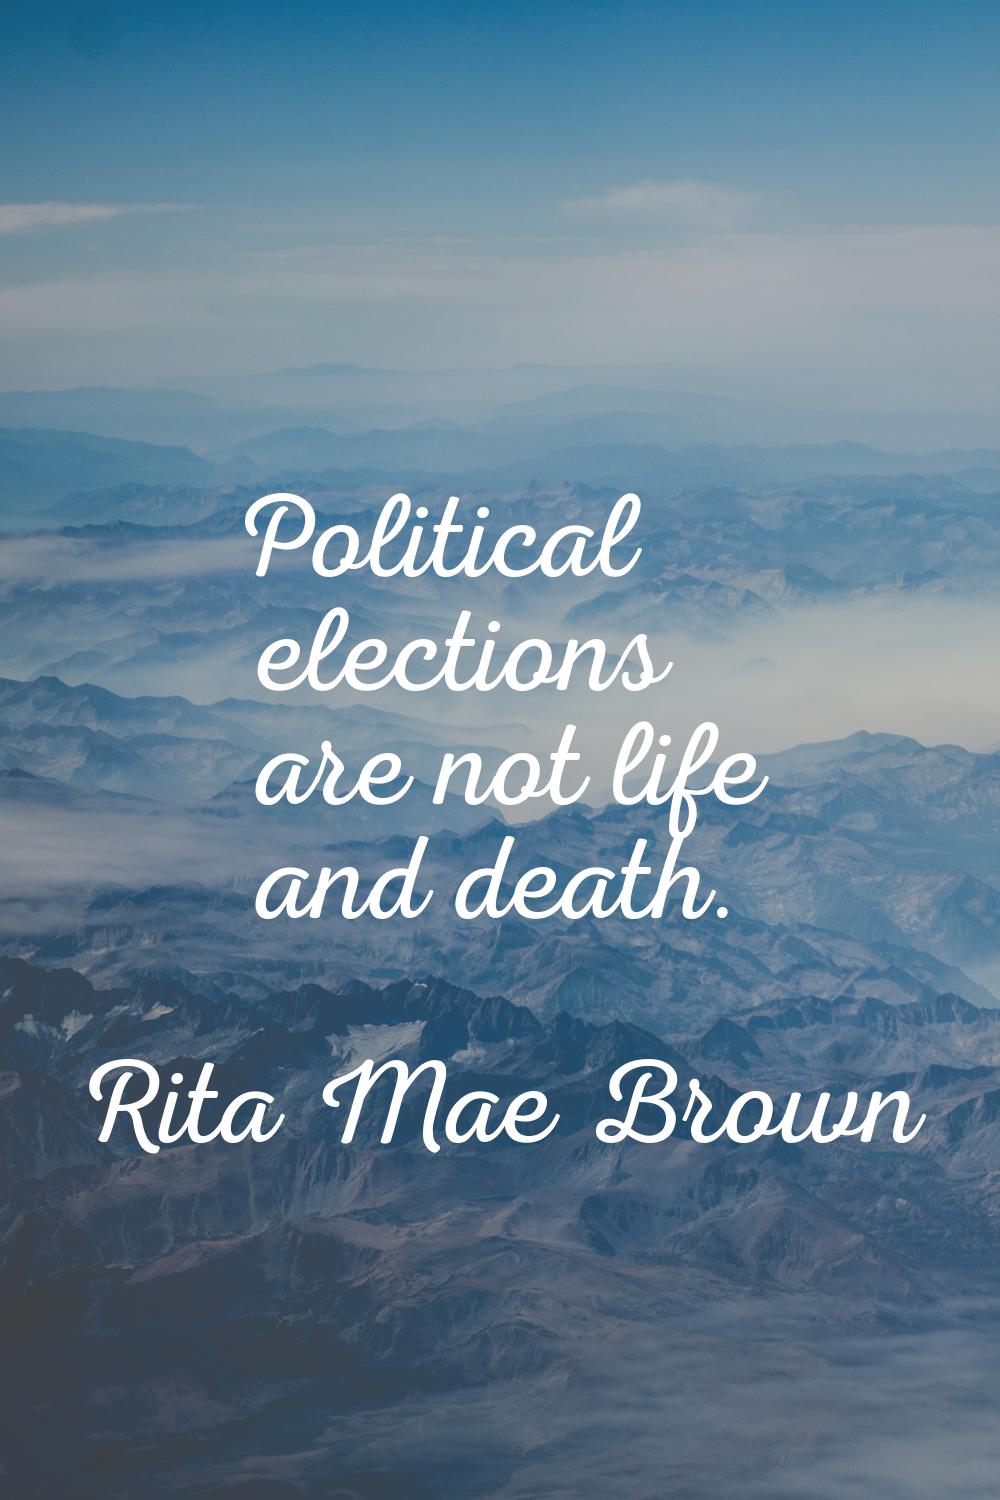 Political elections are not life and death.